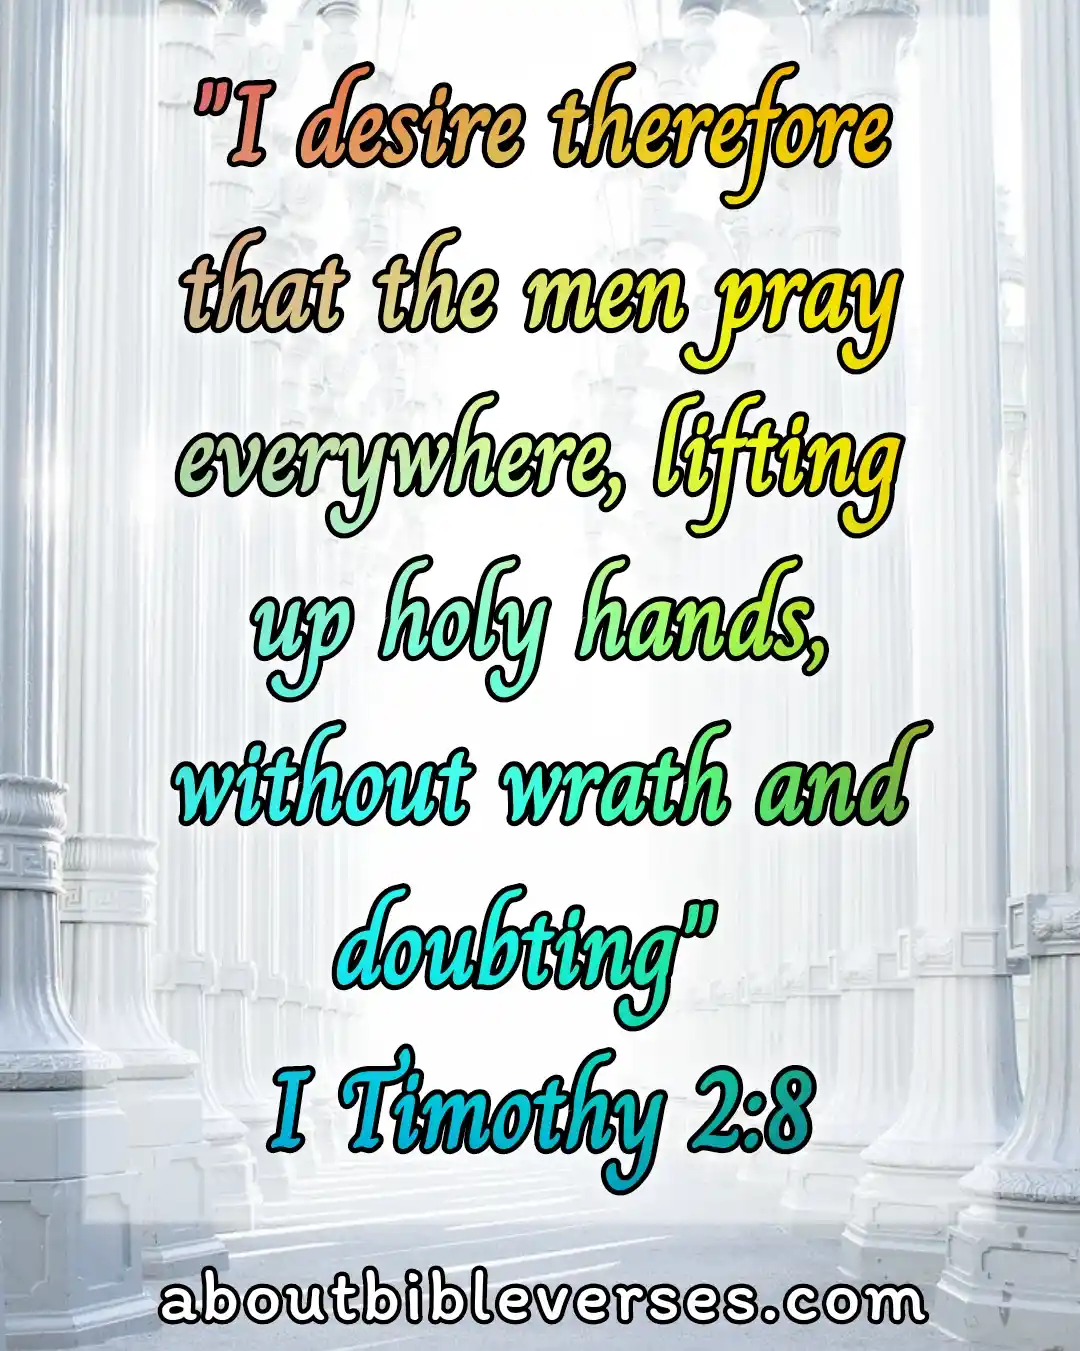 bible verses About Power Of prayer (1 Timothy 2:8)